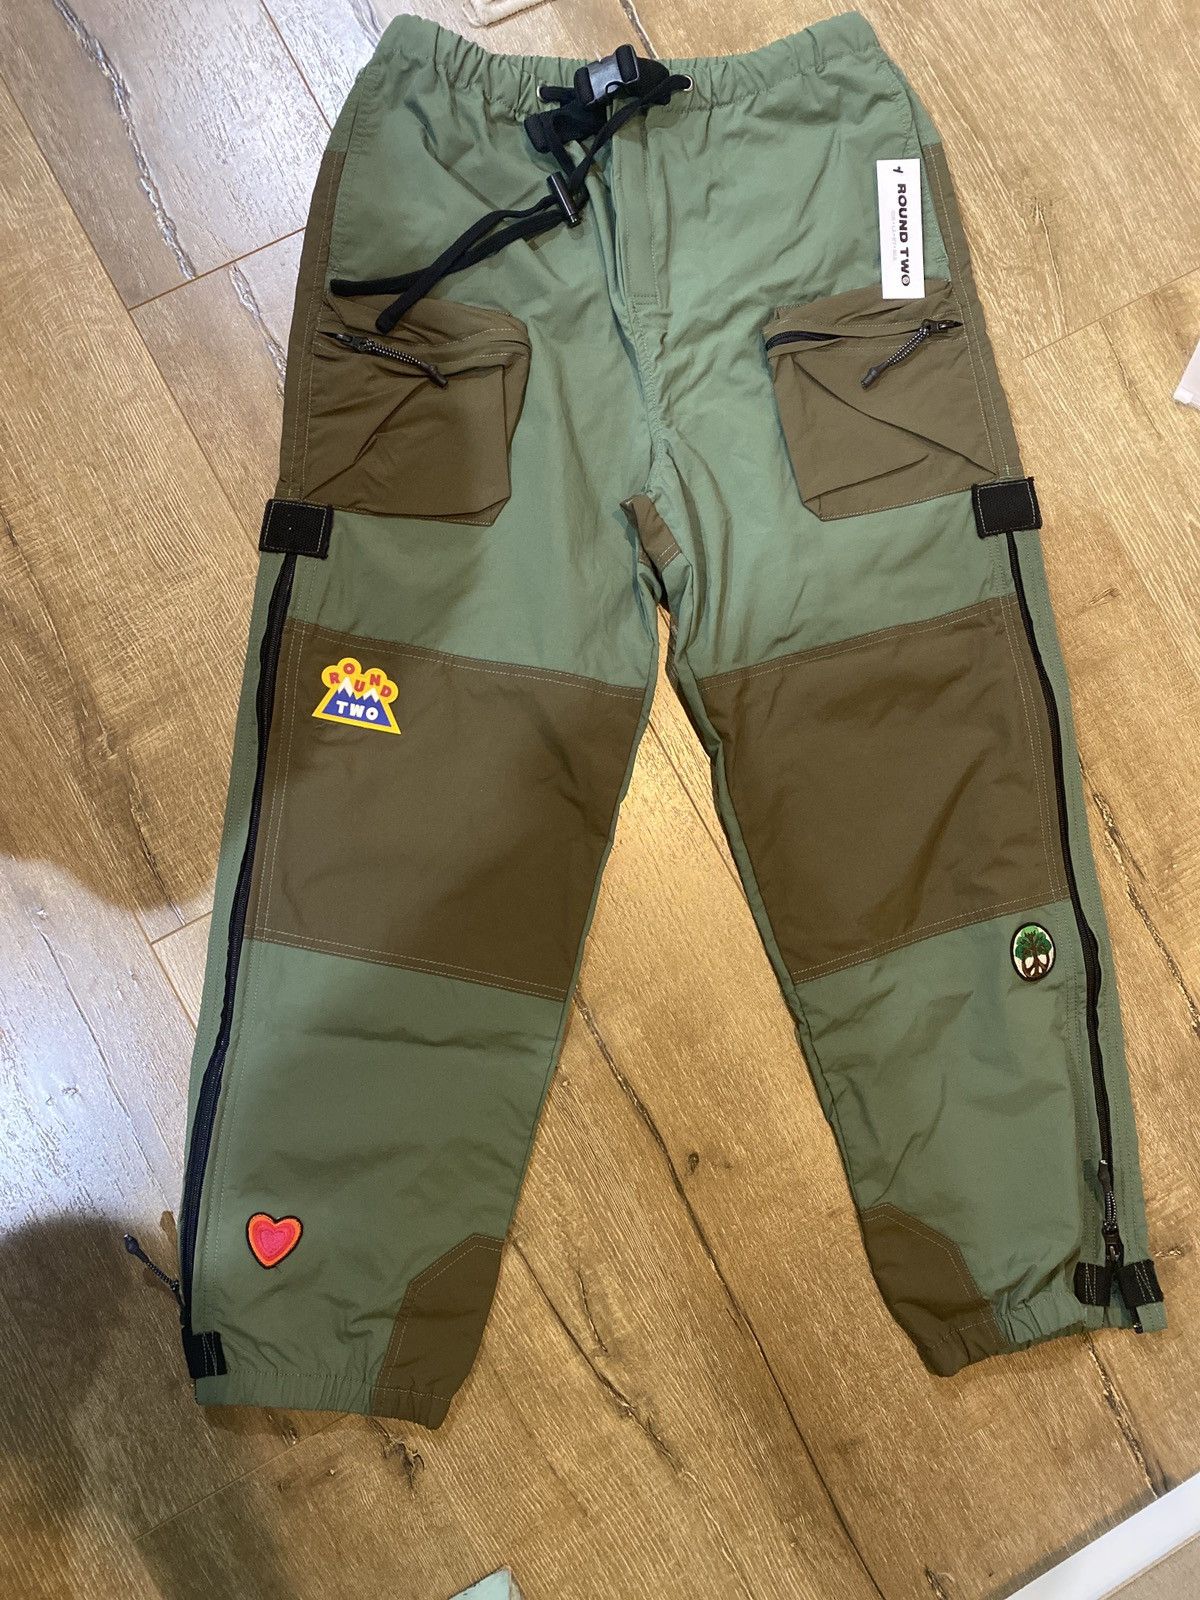 ROUND TWO hiking pant